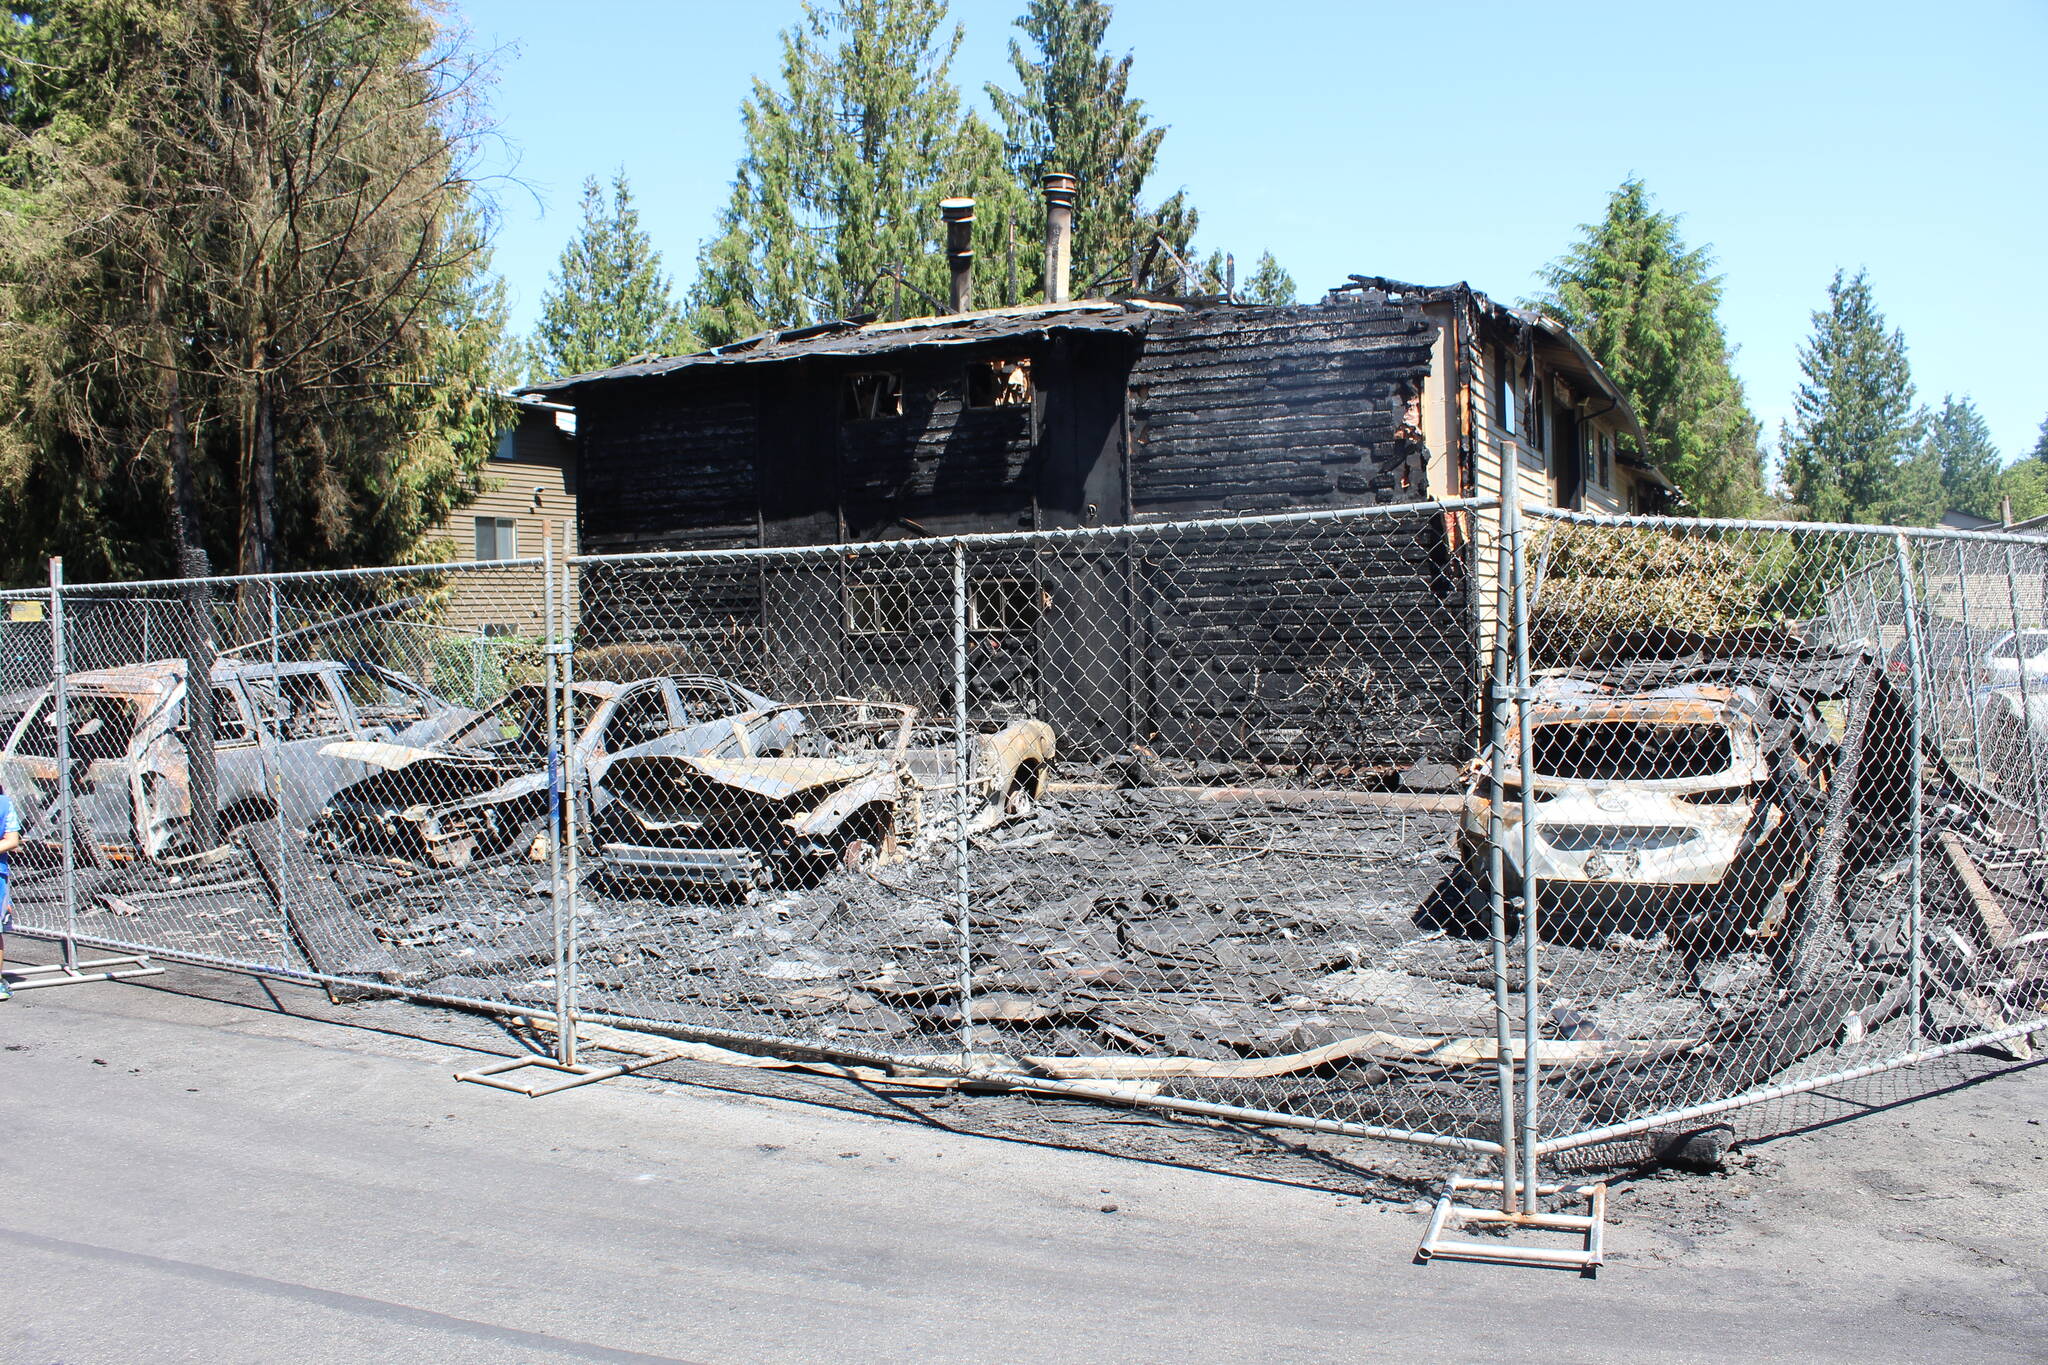 According to Sergeant M. Corbett Ford, the cause of the fire is currently under investigation by the King County Sherriff’s Office. Photo by Bailey Jo Josie/Sound Publishing.